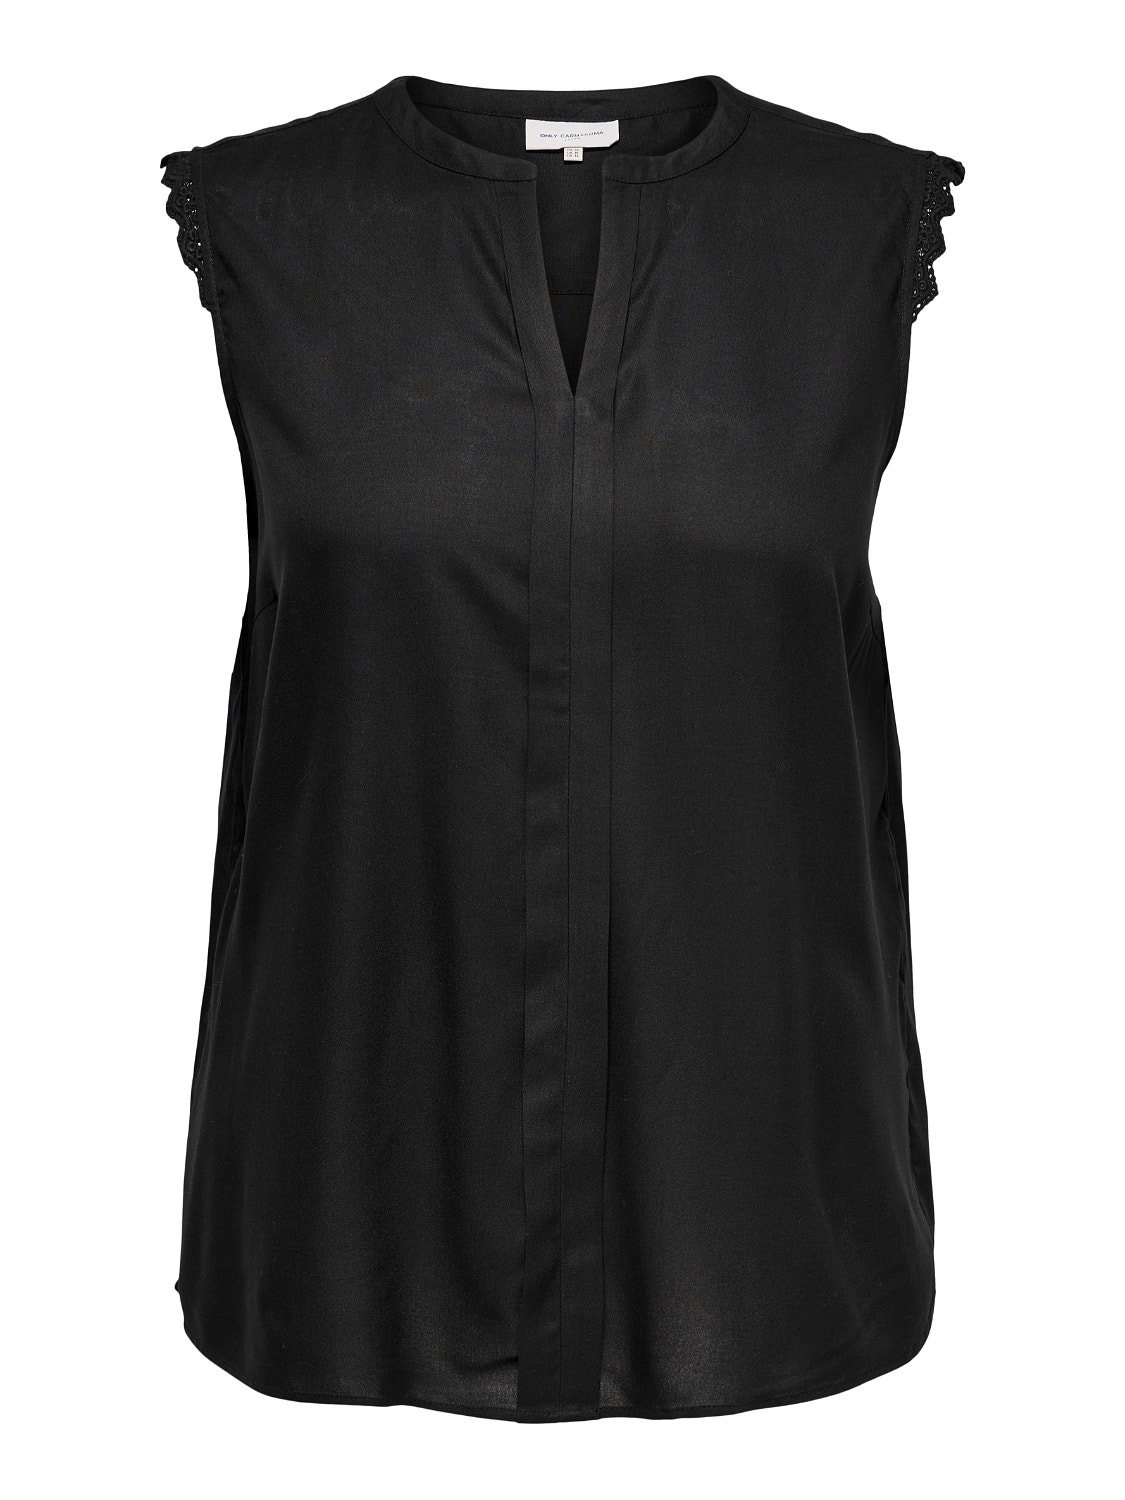 ONLY Curvy loose Sleeveless Top -Black - 15187018